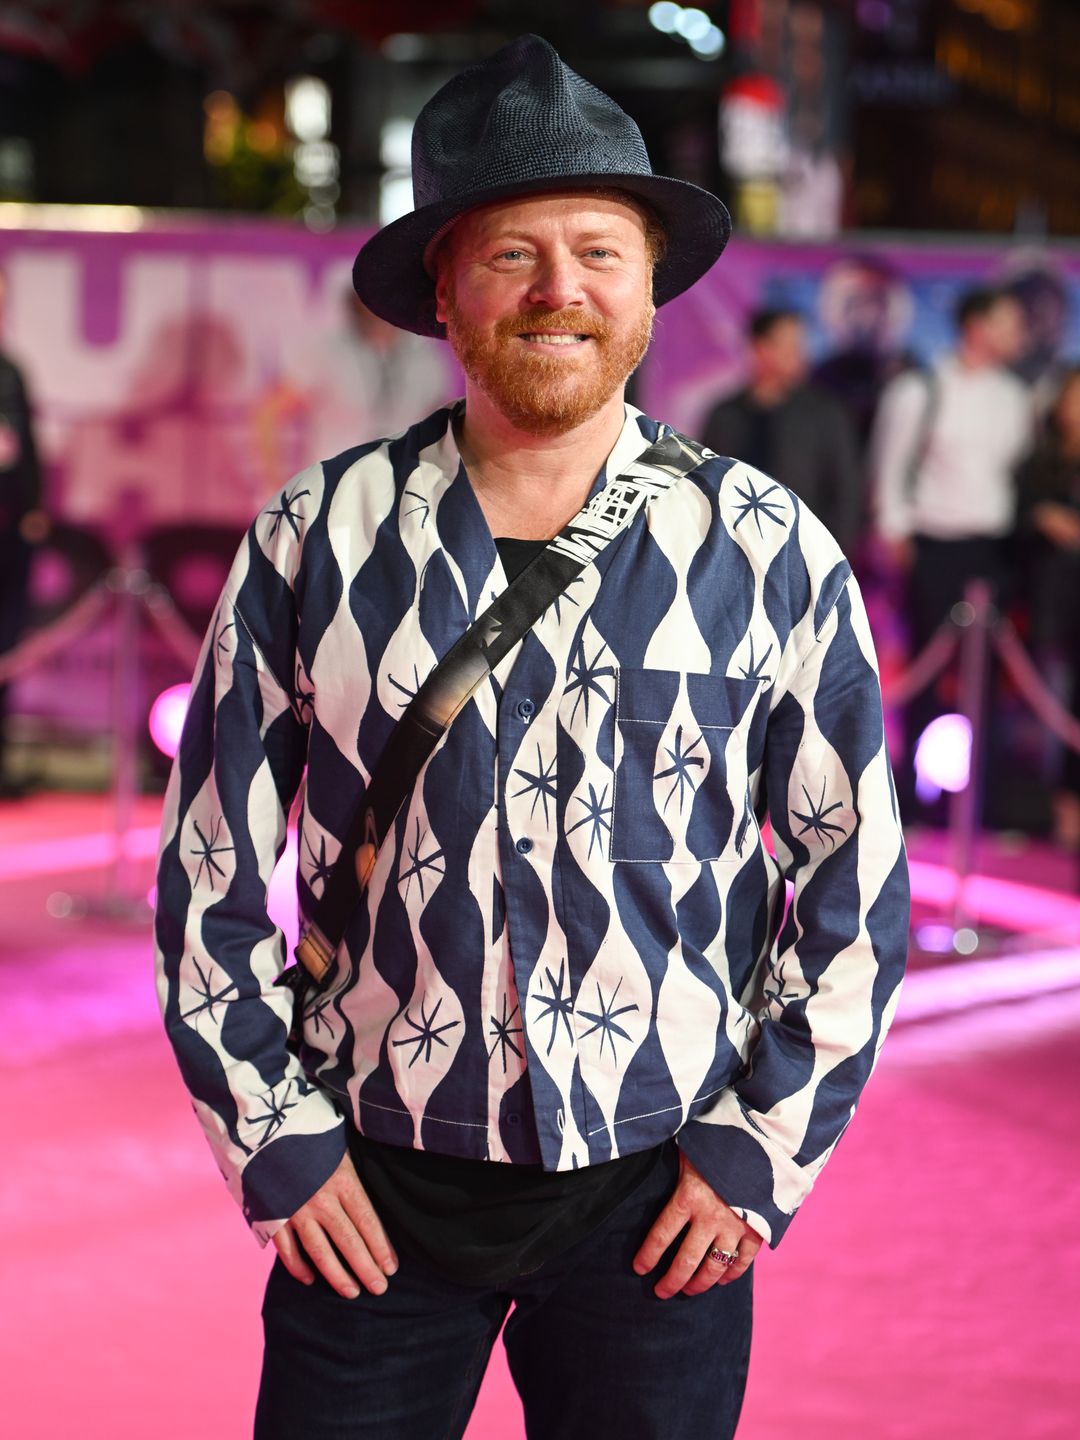 Leigh Francis attends the "Sumotherhood" World Premiere